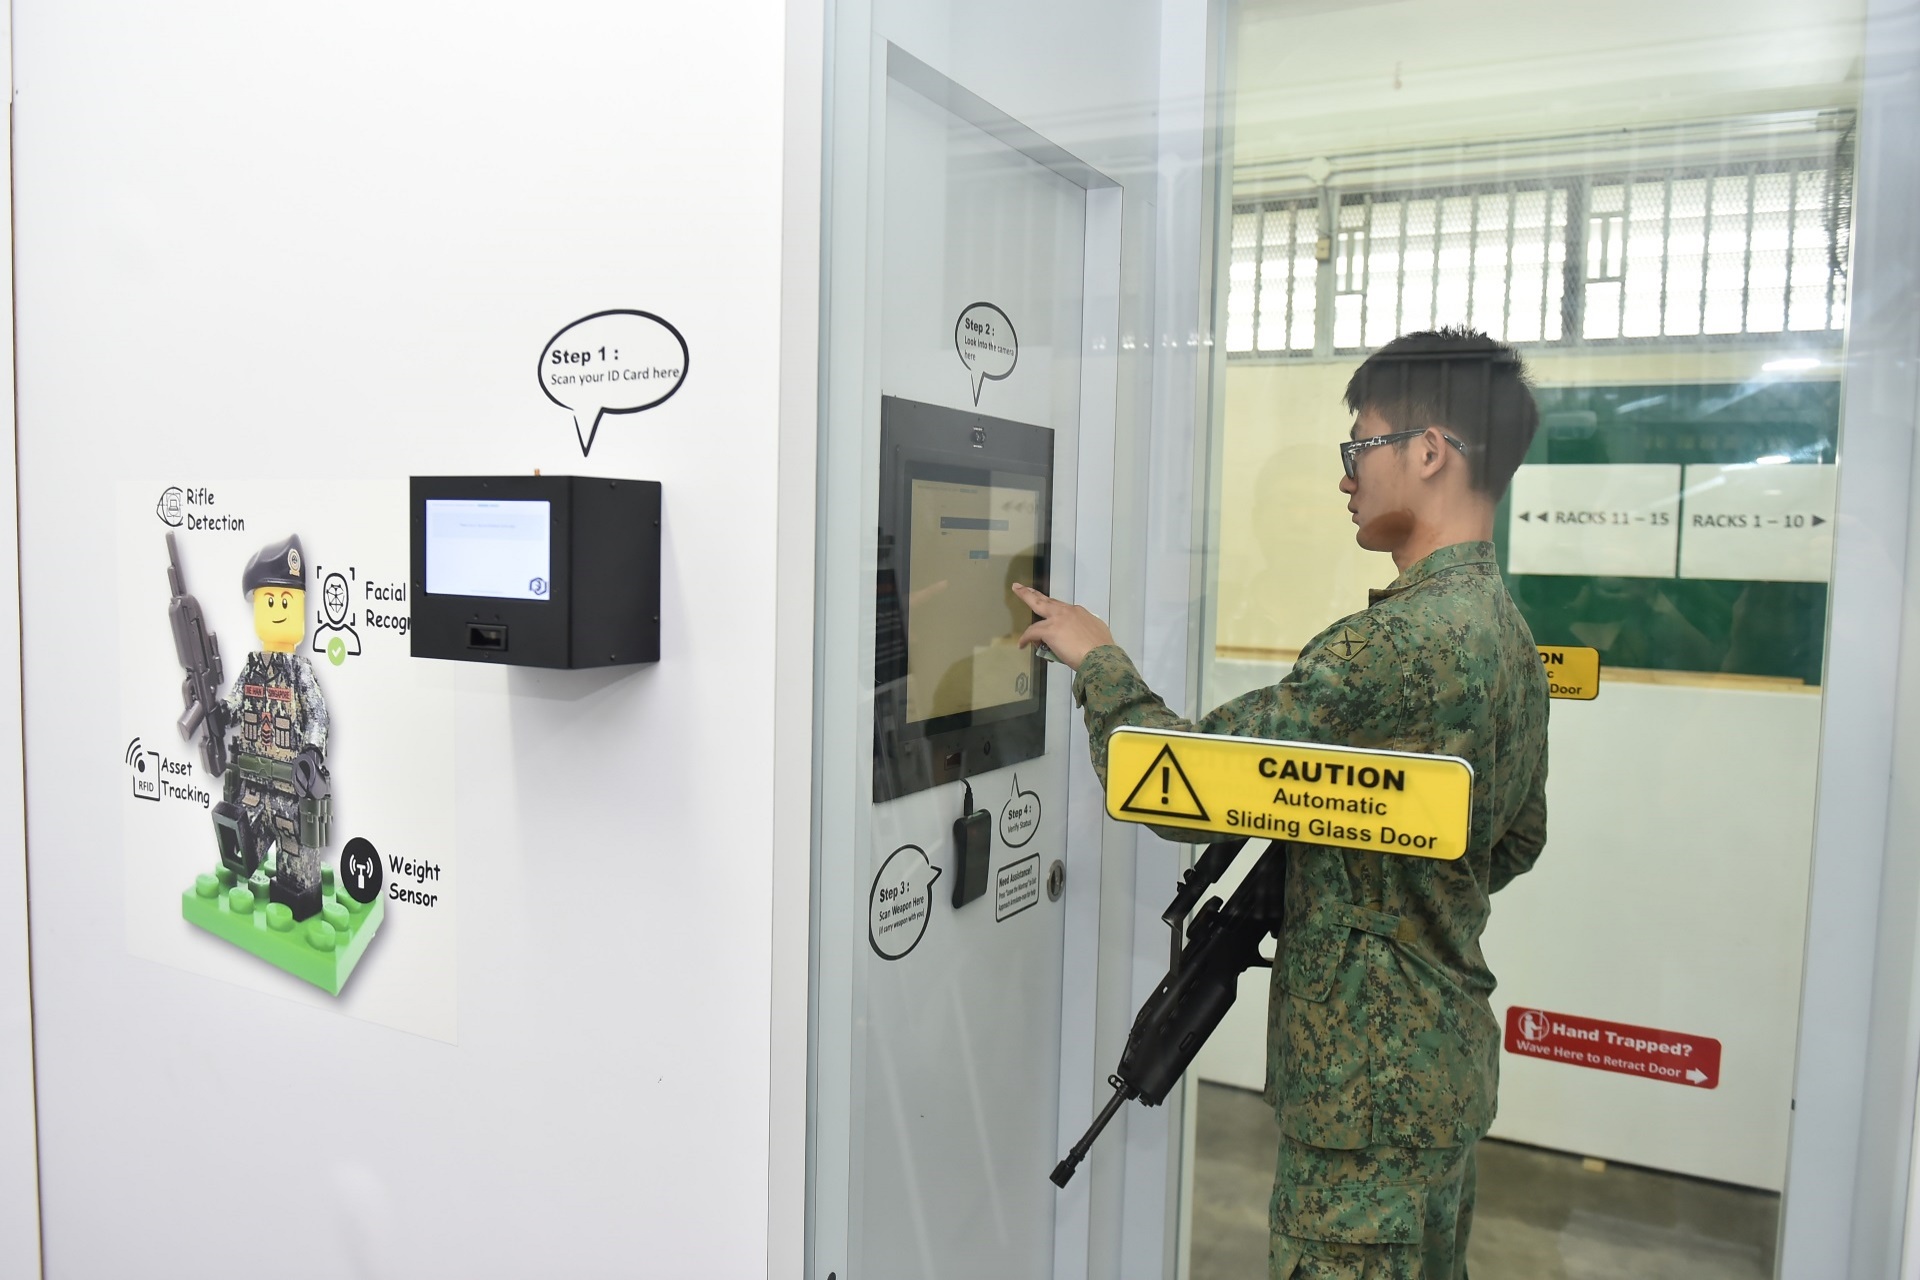 Smart camp, safety app: innovations to improve NS experience